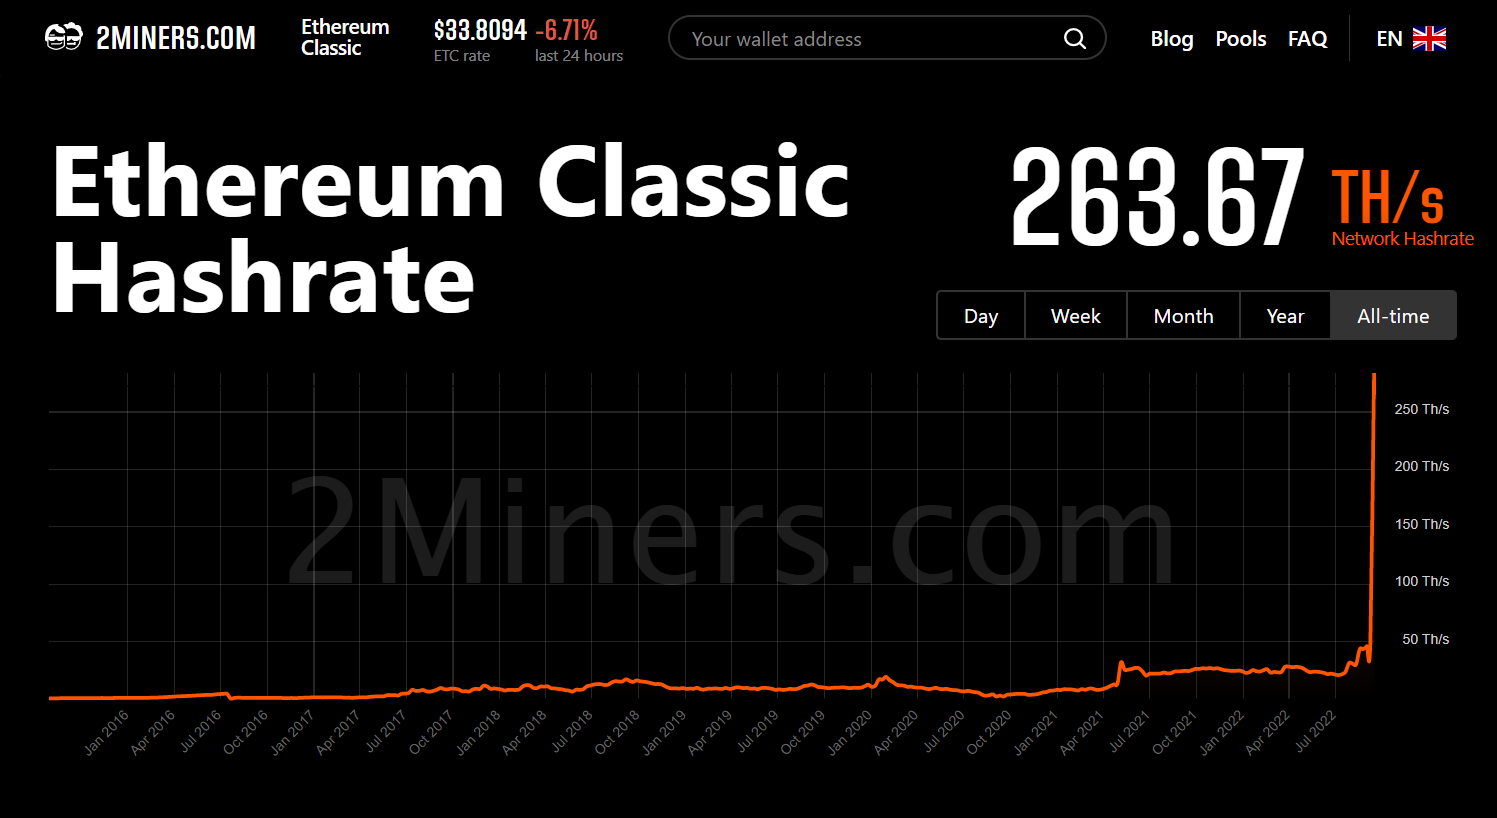 Ethereum Classic (ETC) hashrate at 11:54 am on September 16, 2022. Source: 2Miner